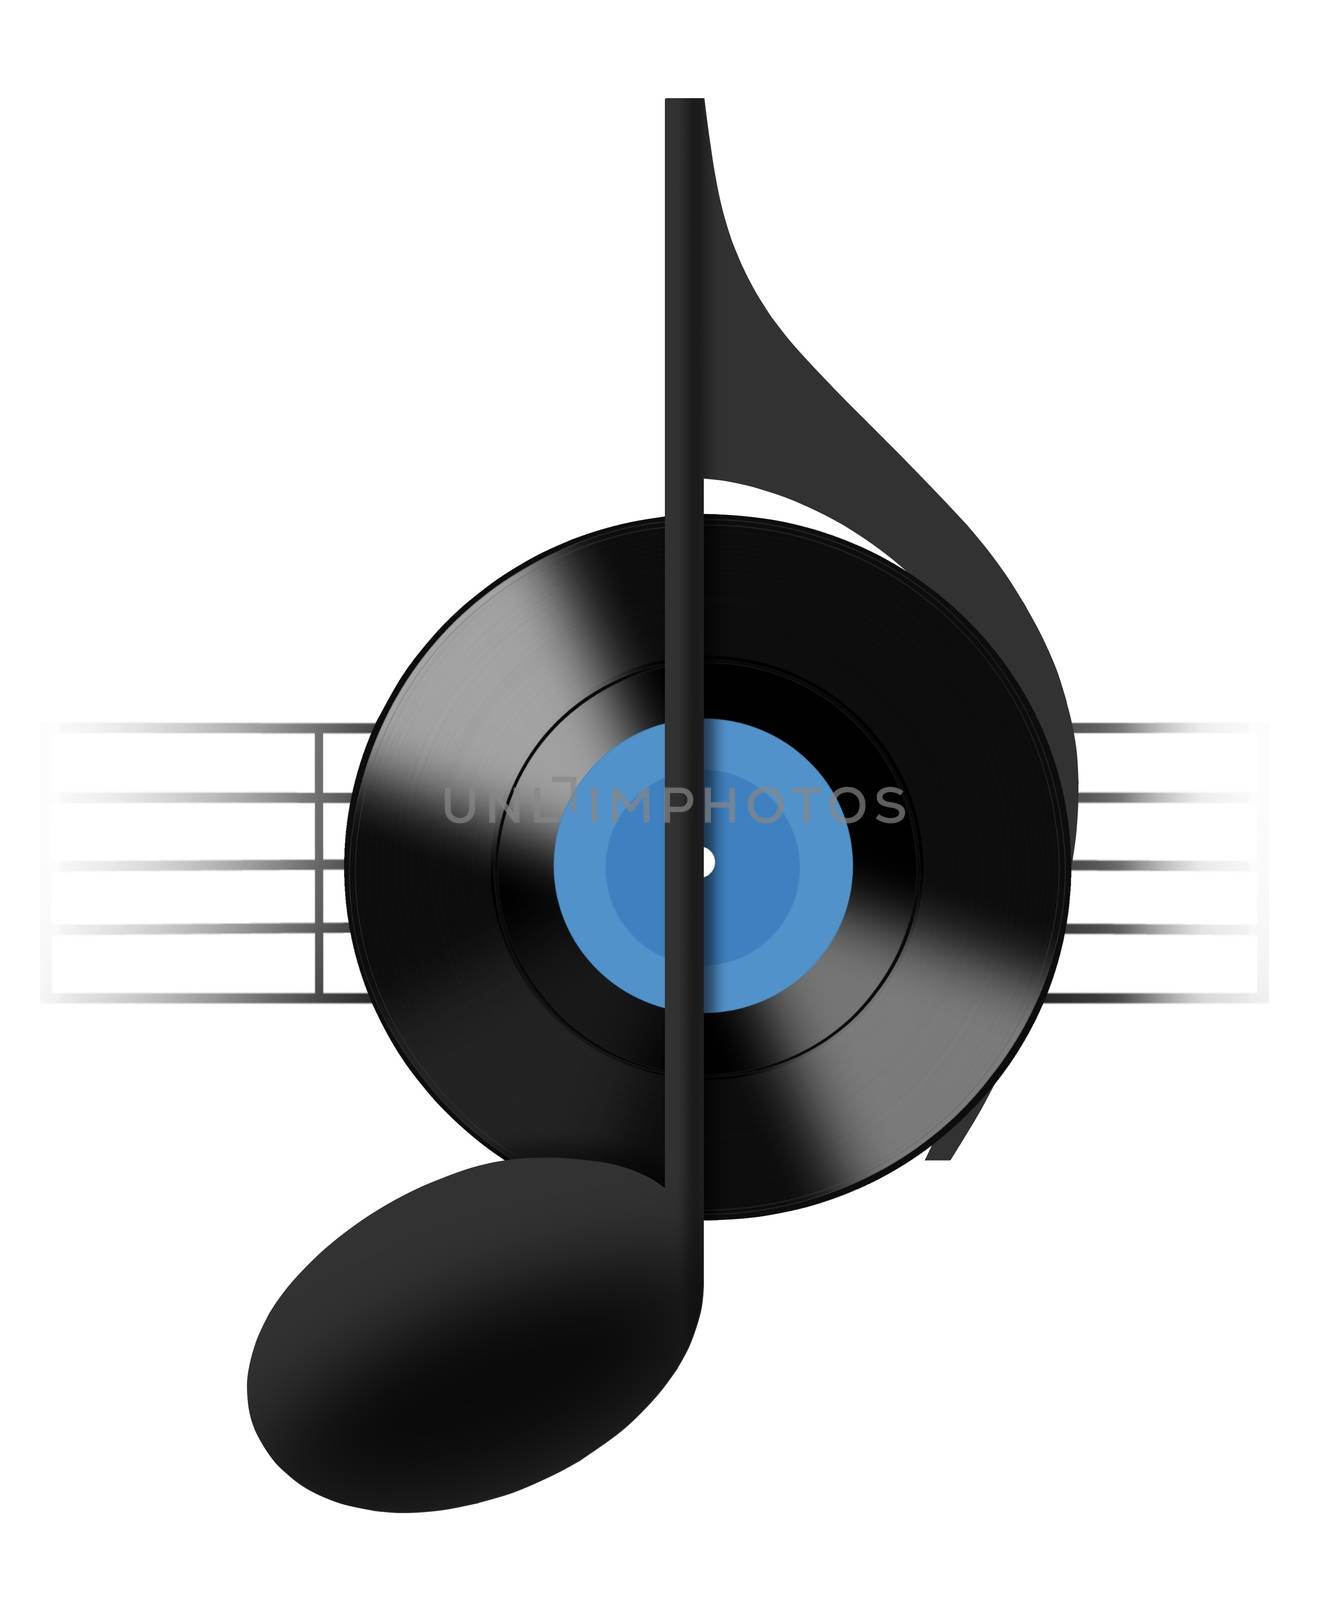 Vinyl Record and Music Note by razihusin